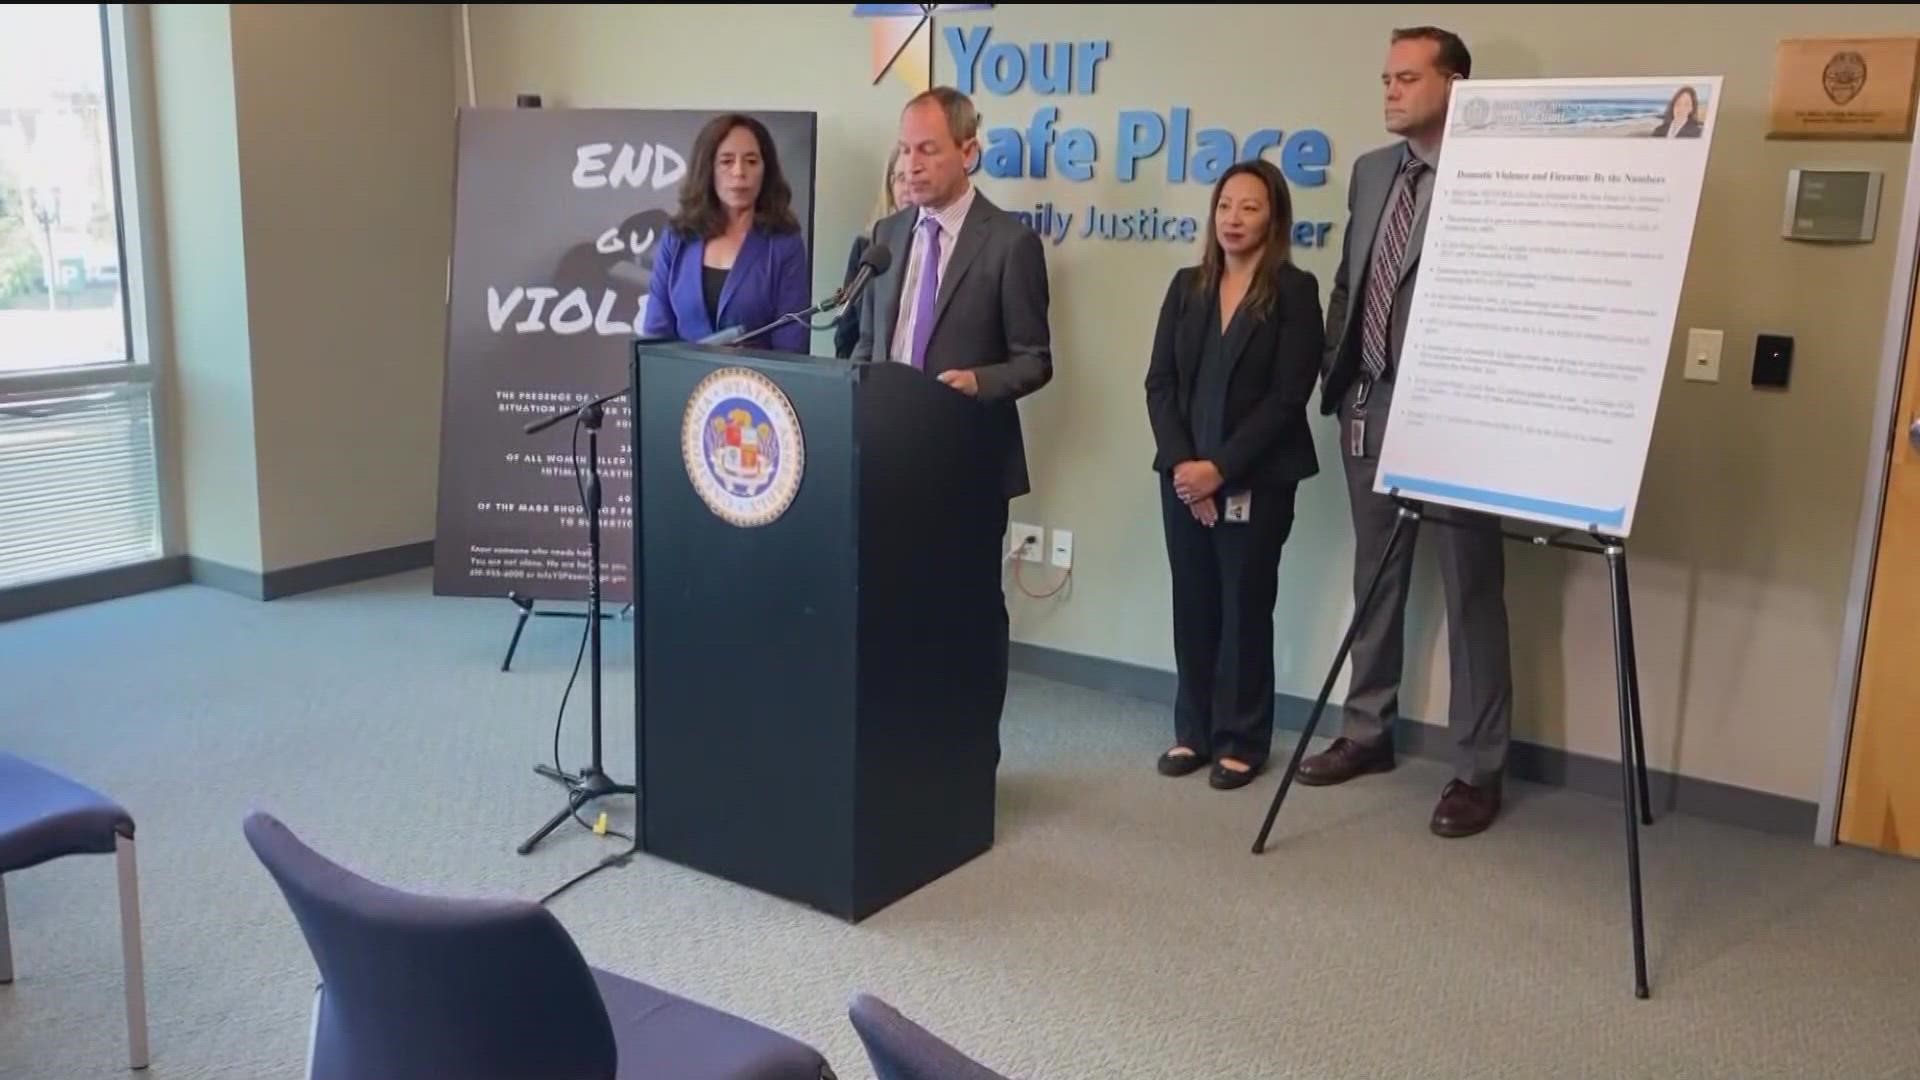 AB 2137 requires that family justice centers educate victims about GVROs.